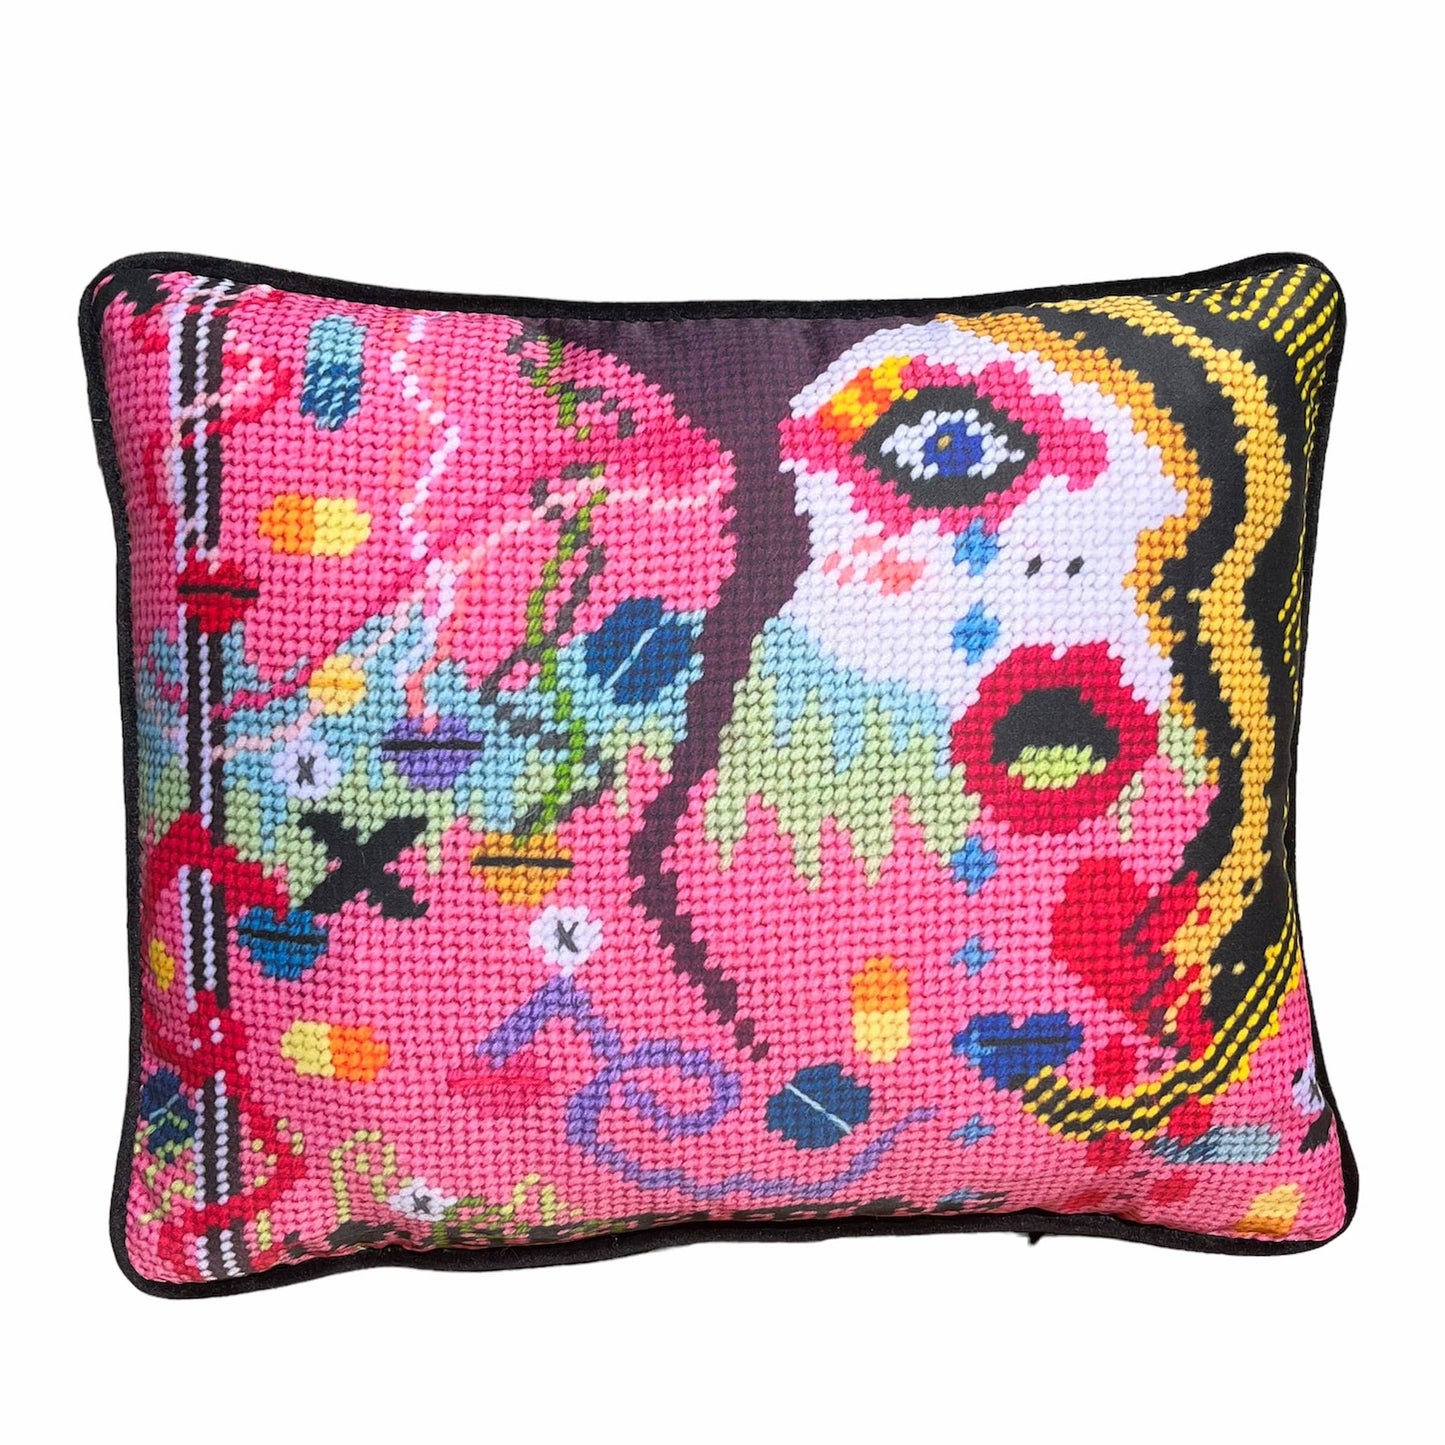 modern woman's face with mouth open; a smattering of cool snakes with lips; pills; XO . Super colorful pink velvet background with lots of blues, greens, red hearts. Super fun pop art!